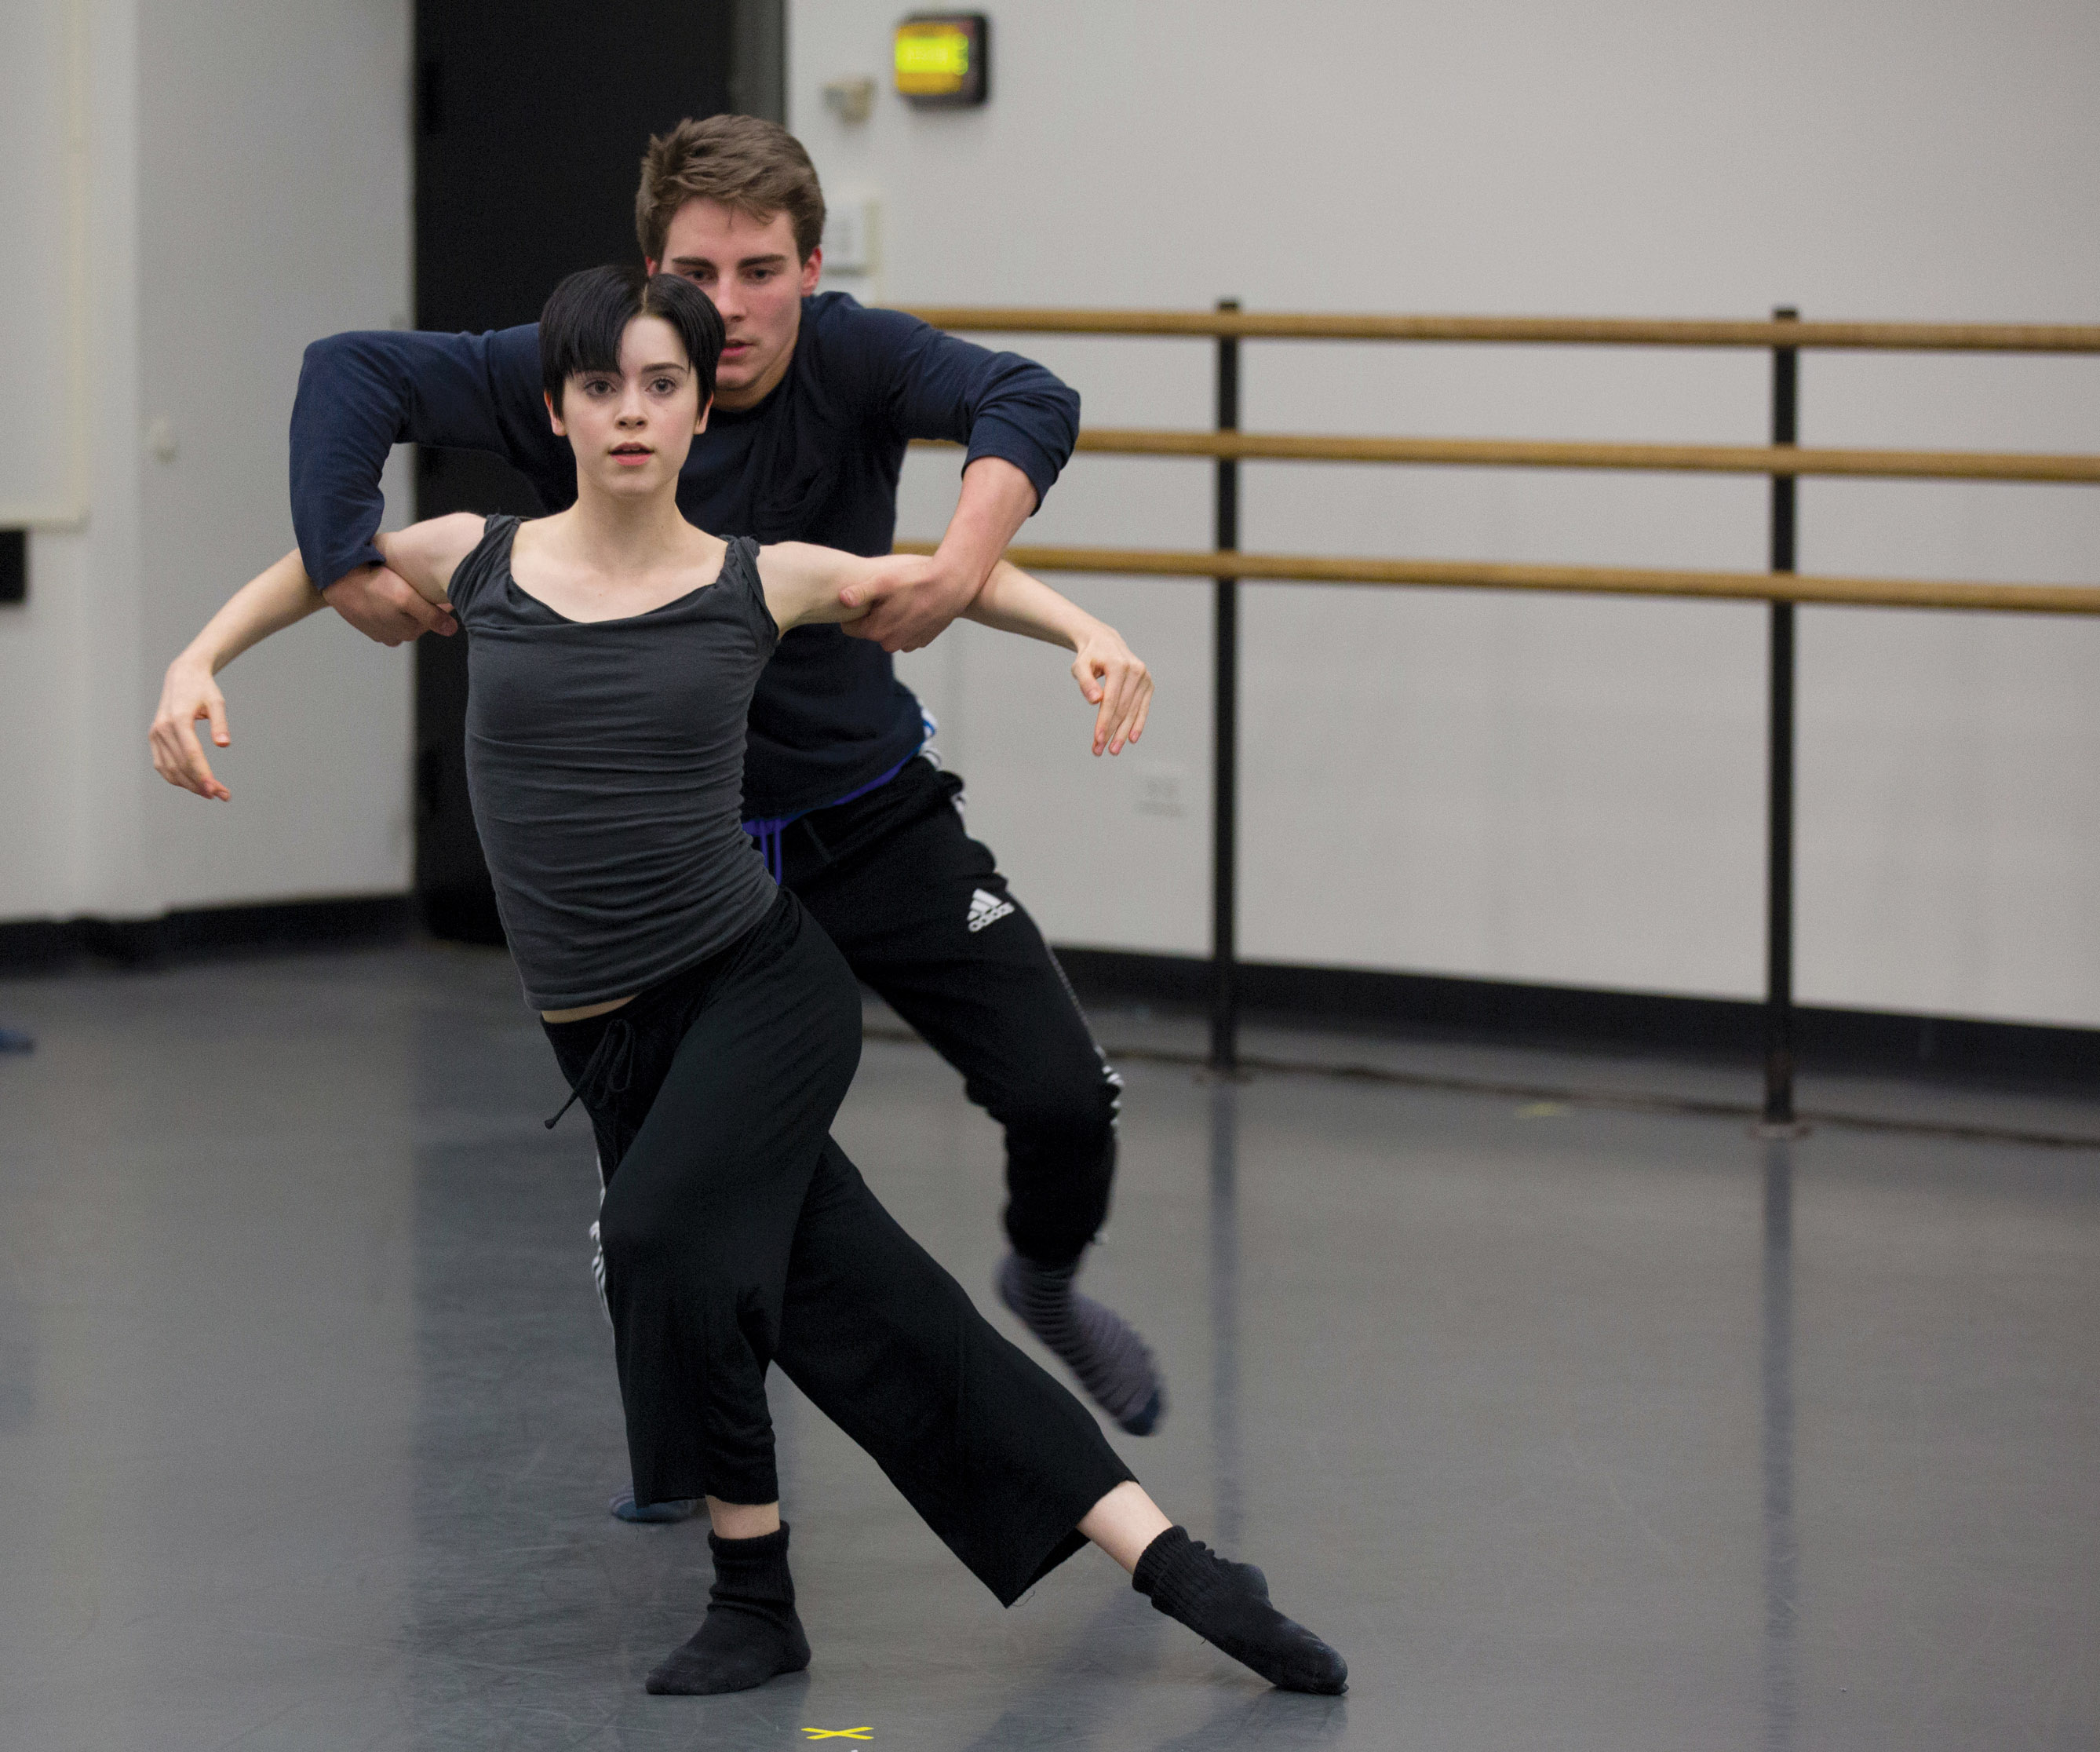 Dancers Bronte Mayo and Zane Unger in rehearsal for New Dances